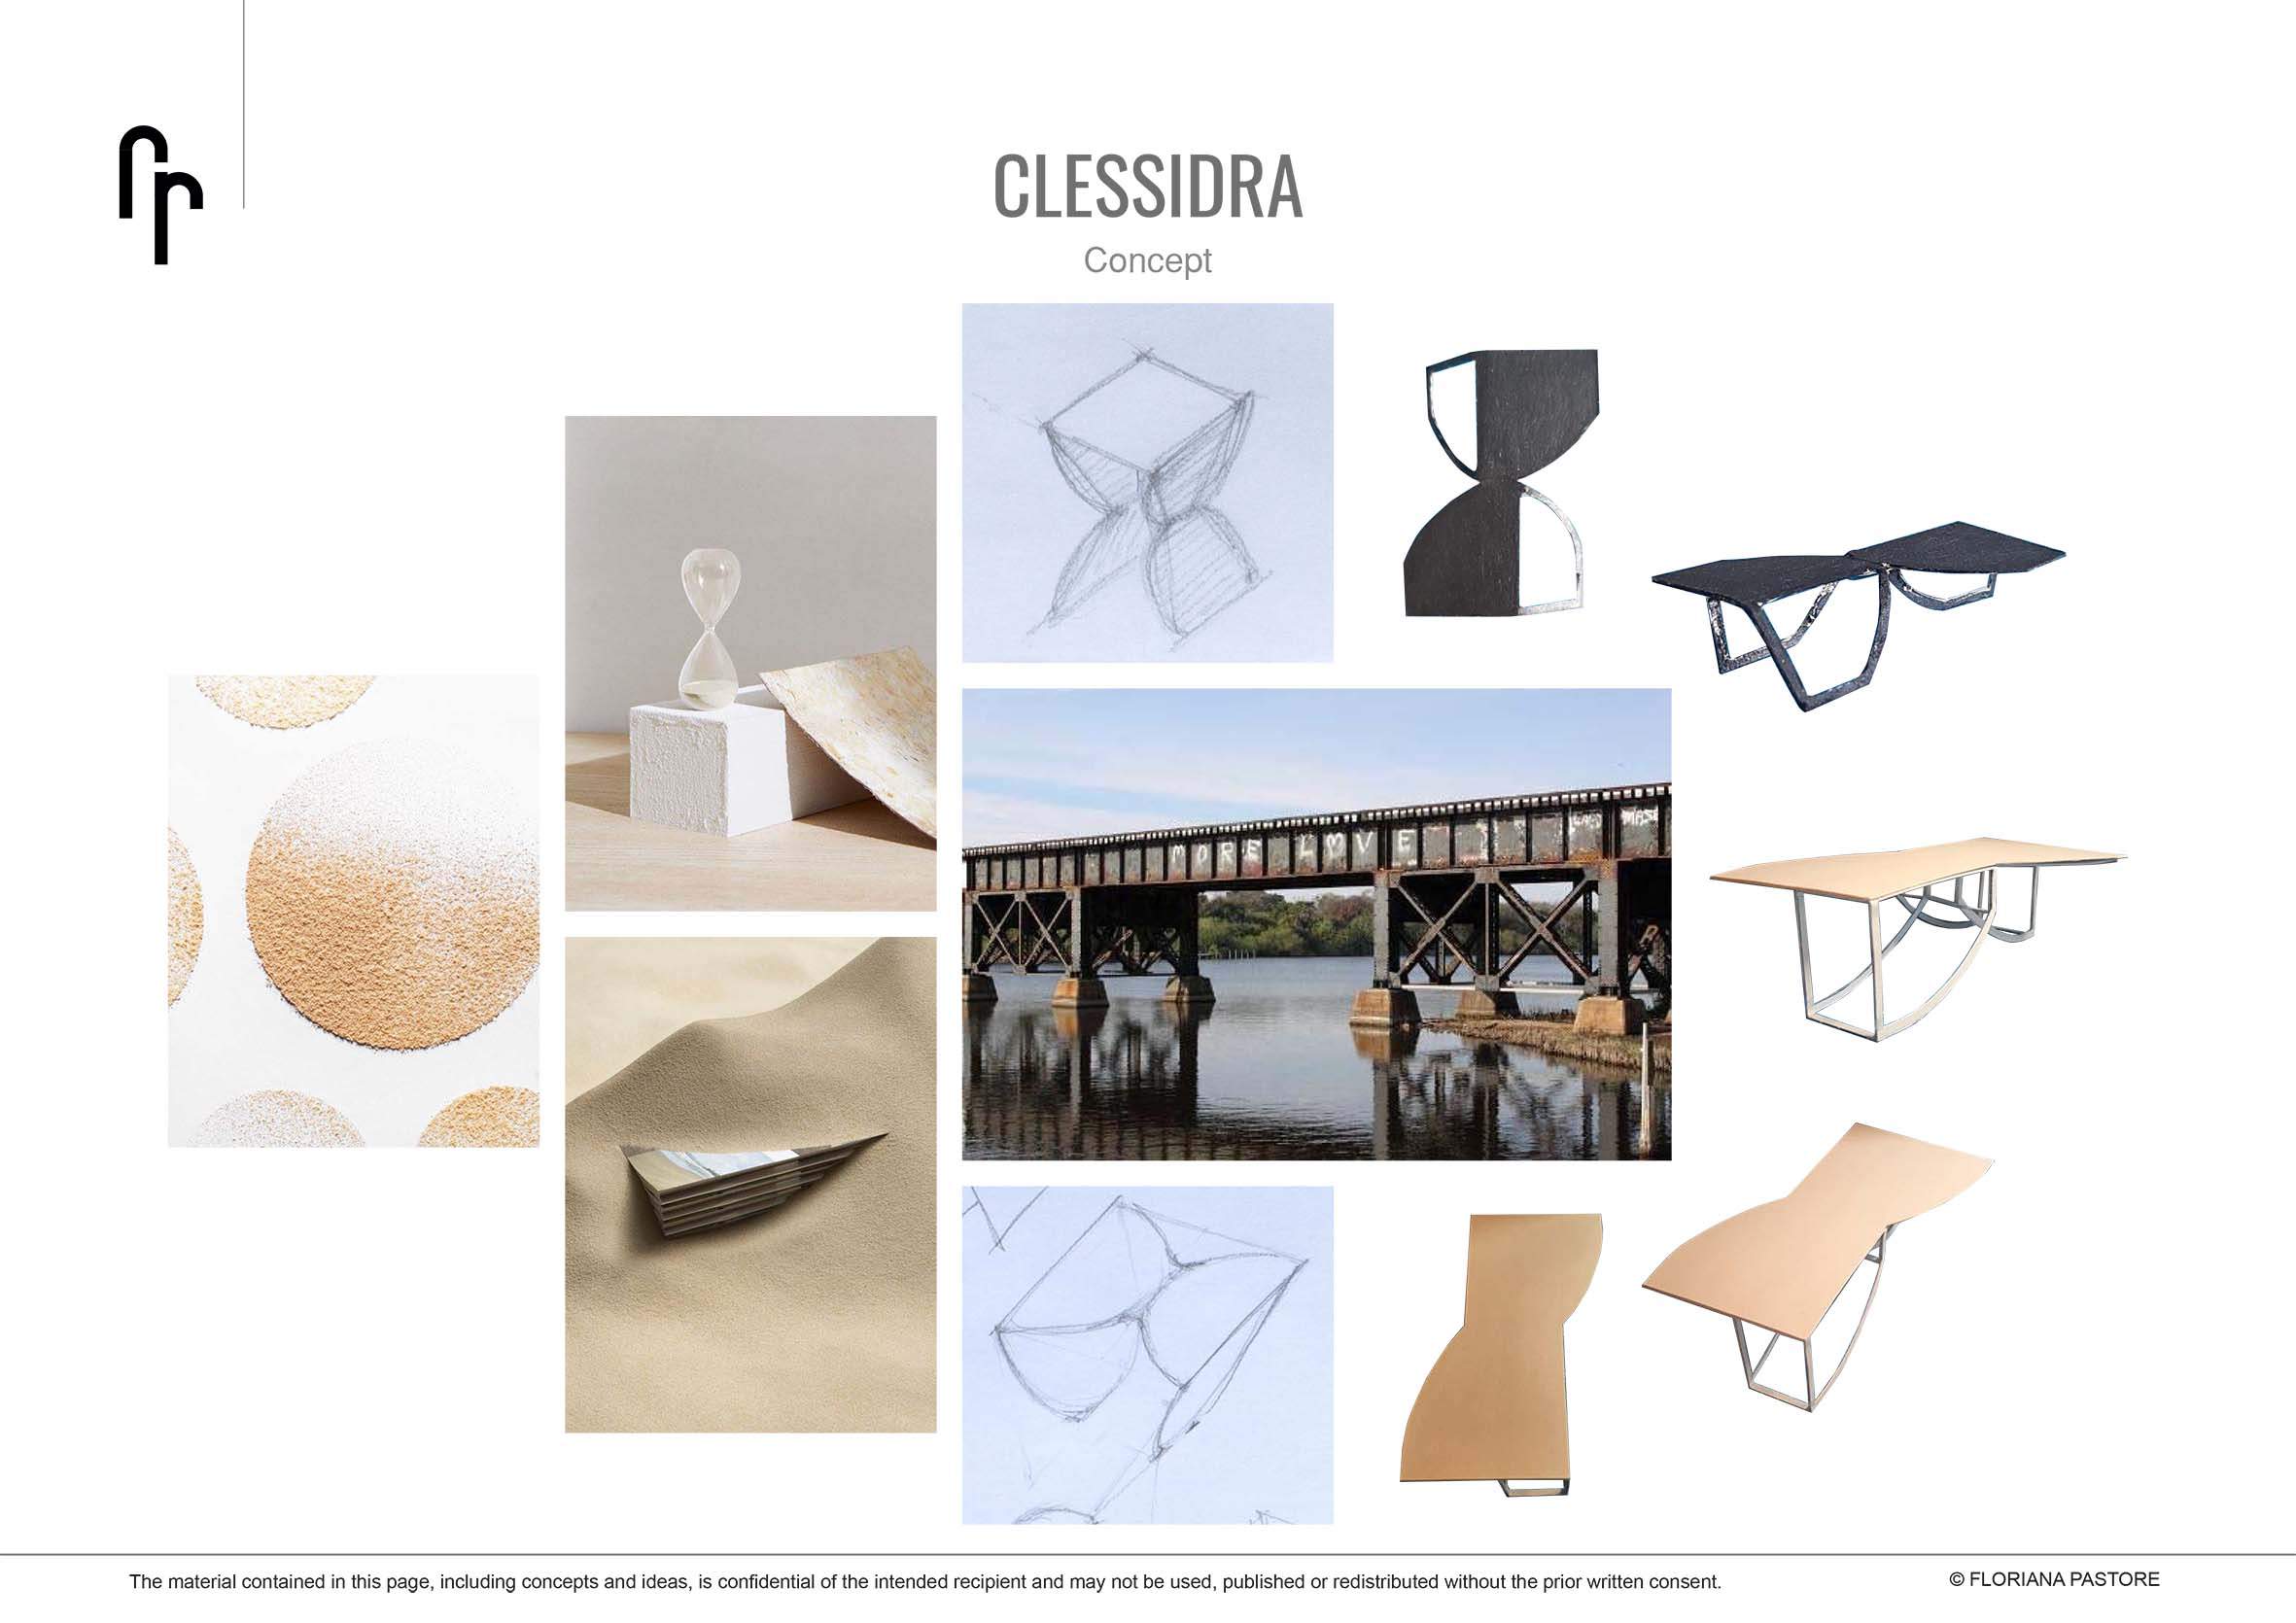 Clessidra, clessidra coffee table, contemporary coffee table, italian luxury coffee table, italian contemporary design, italian furniture design, bespoke luxury furniture, contemporary outdoor coffee table, outdoor furniture design